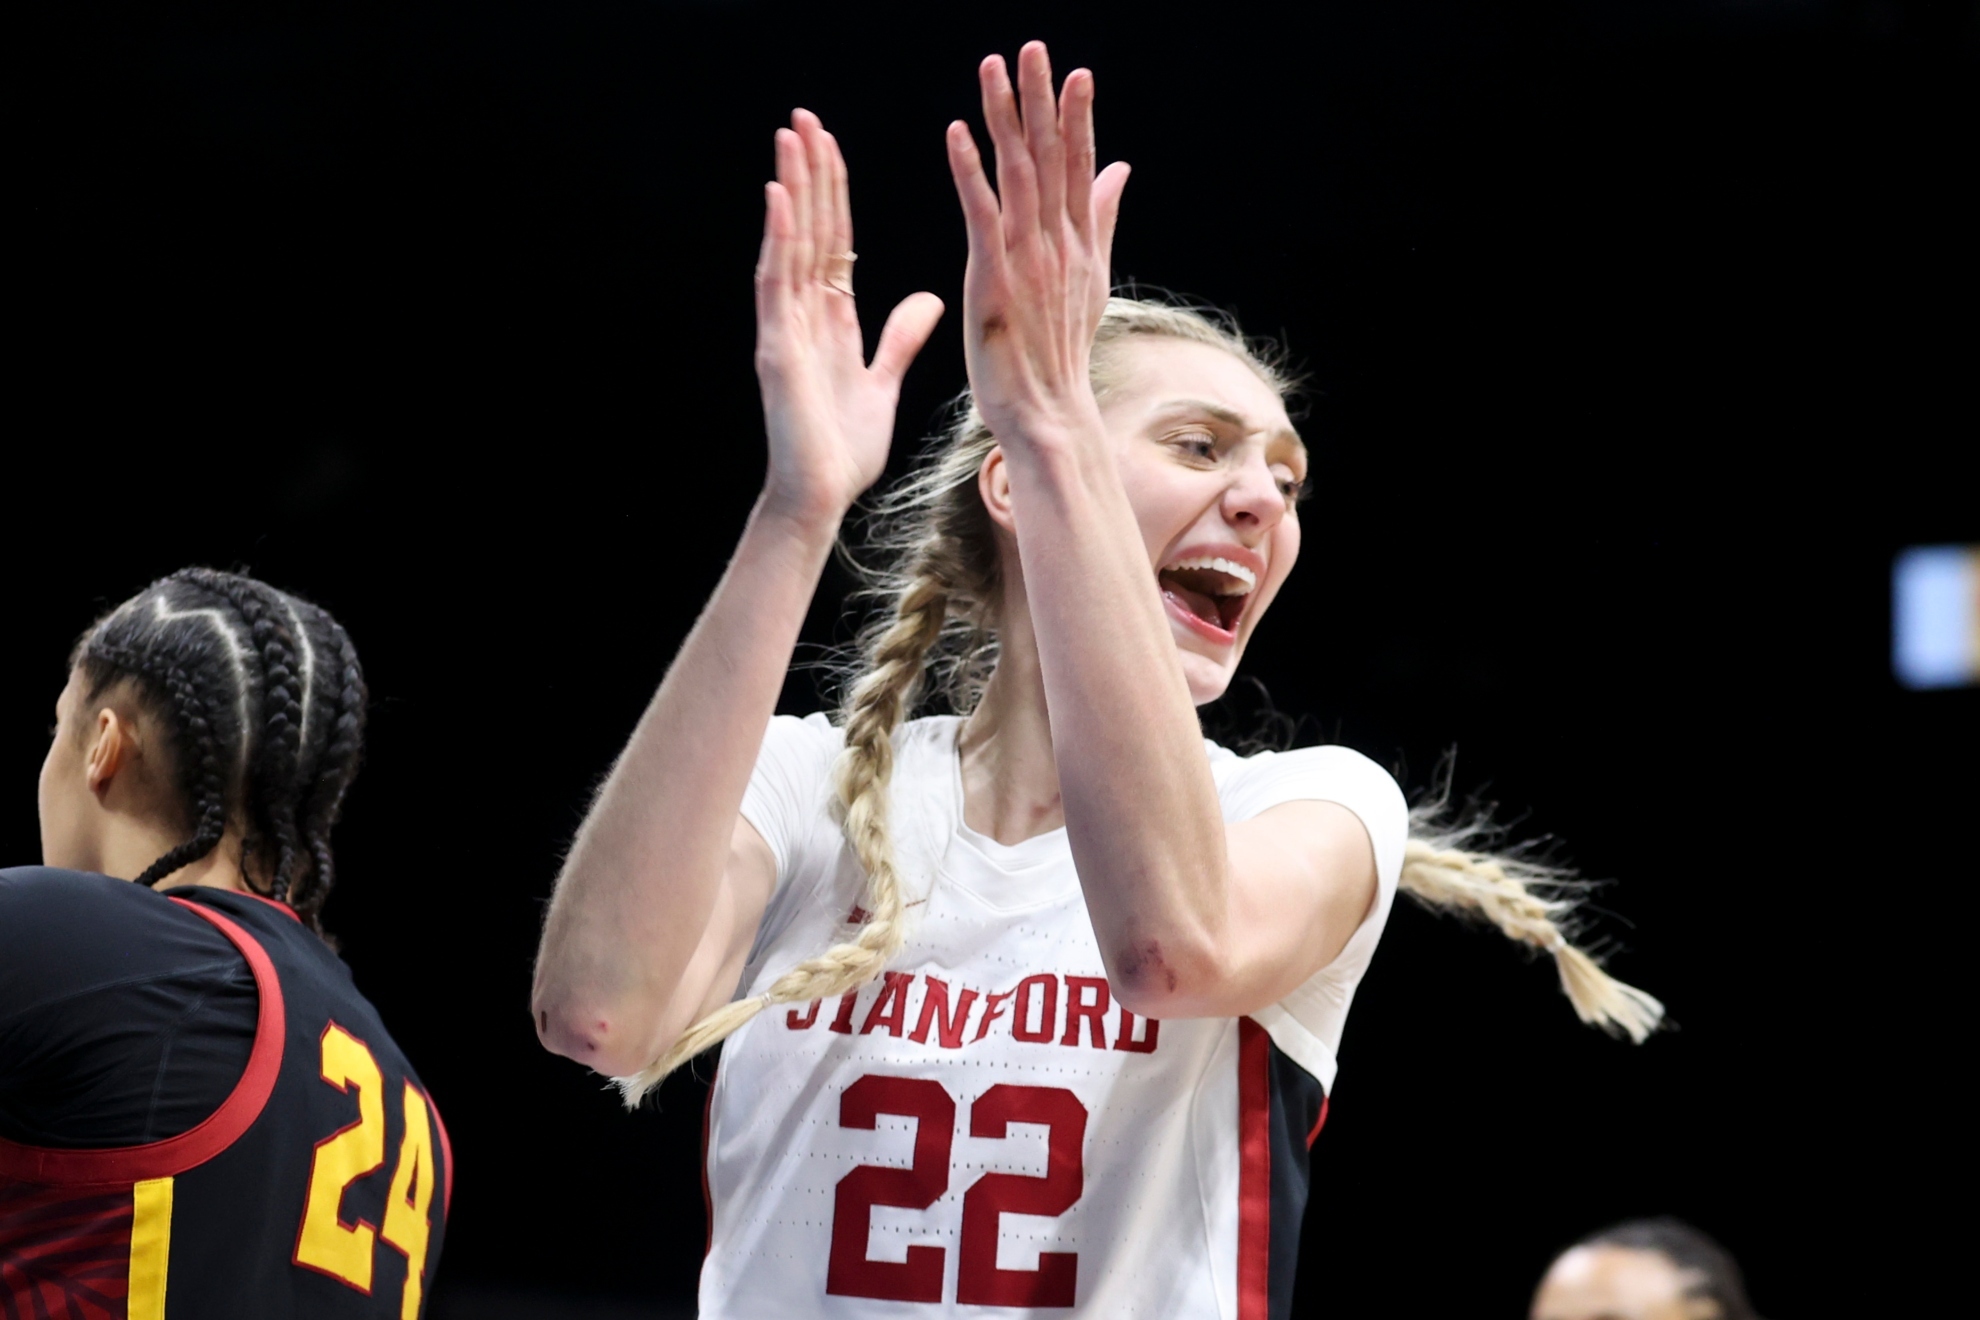 Stanfords Cameron Brink announces WNBA Draft entry, projected No. 2 pick